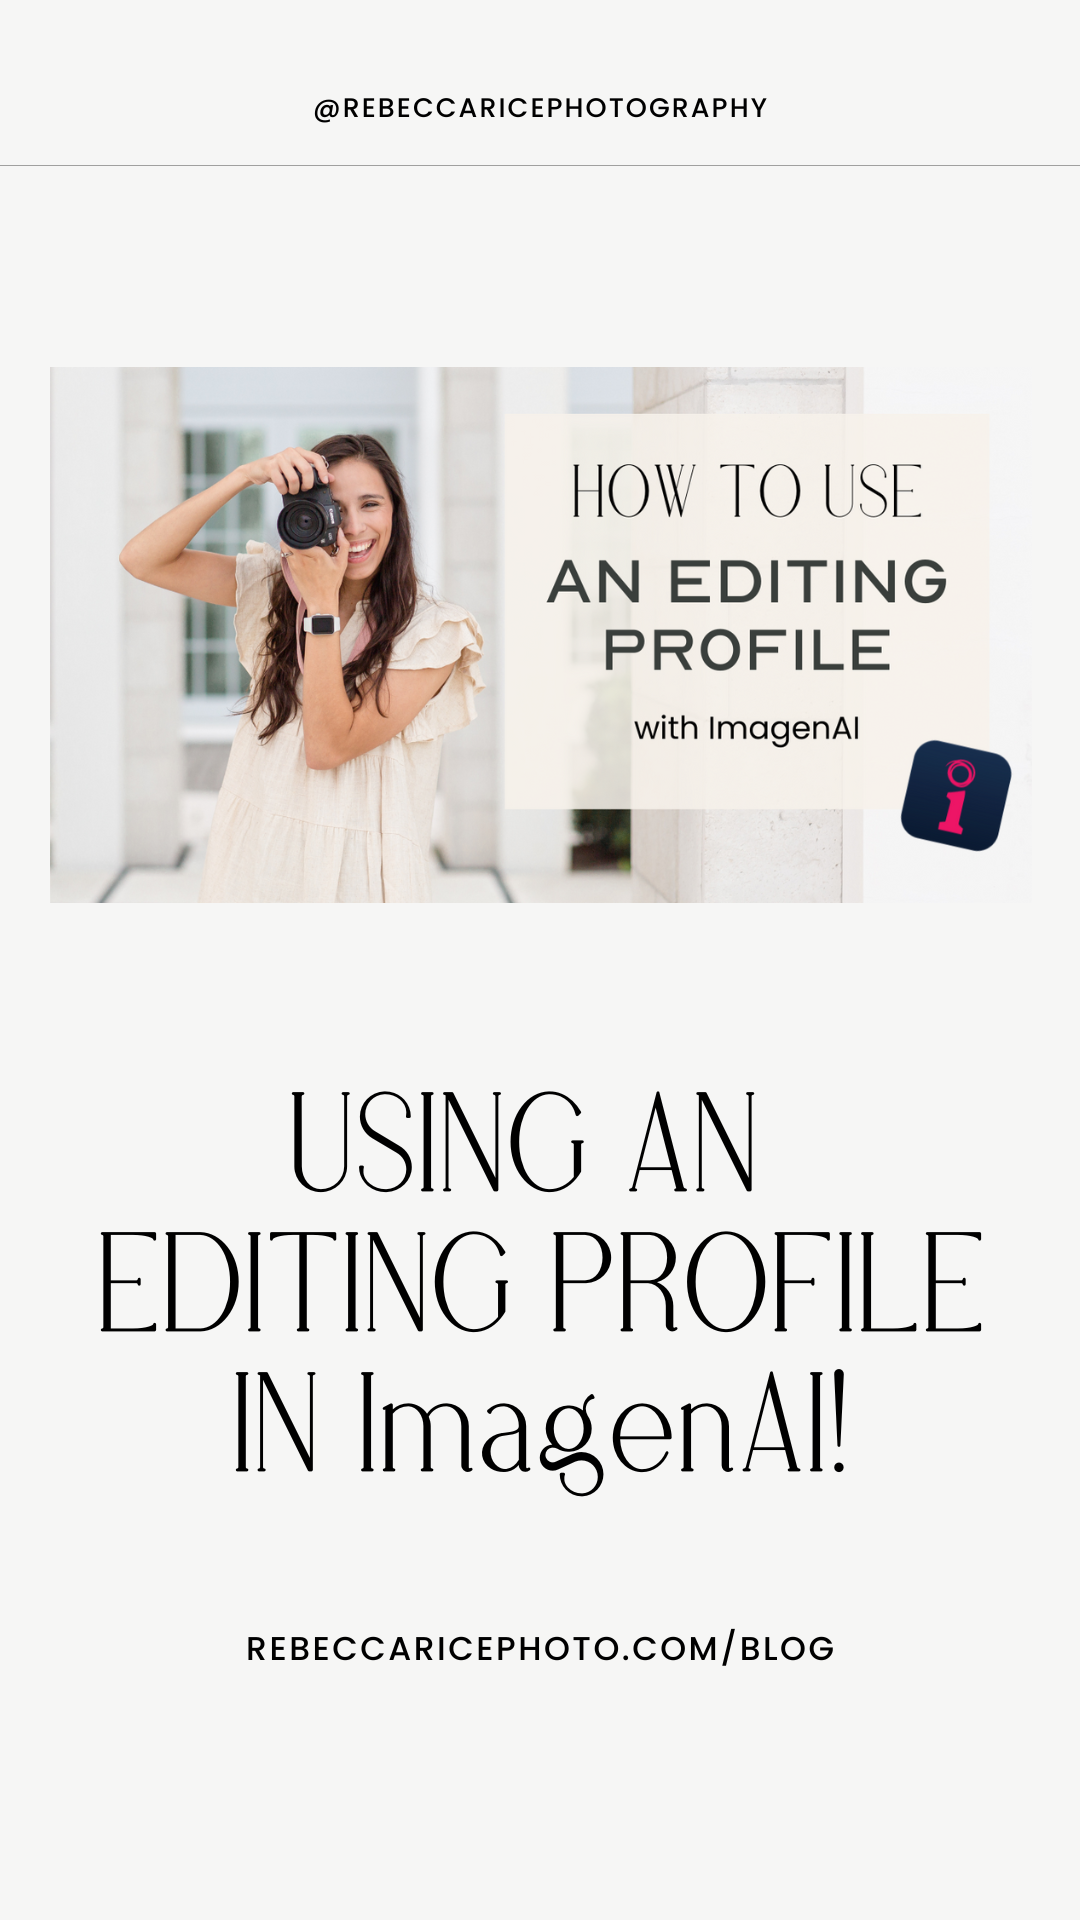 How to Use an Editing Profile in ImagenAI! An editing software to save you HOURS behind a computer editing!

Click to see more on the blog today!
-rebeccaricephoto.com